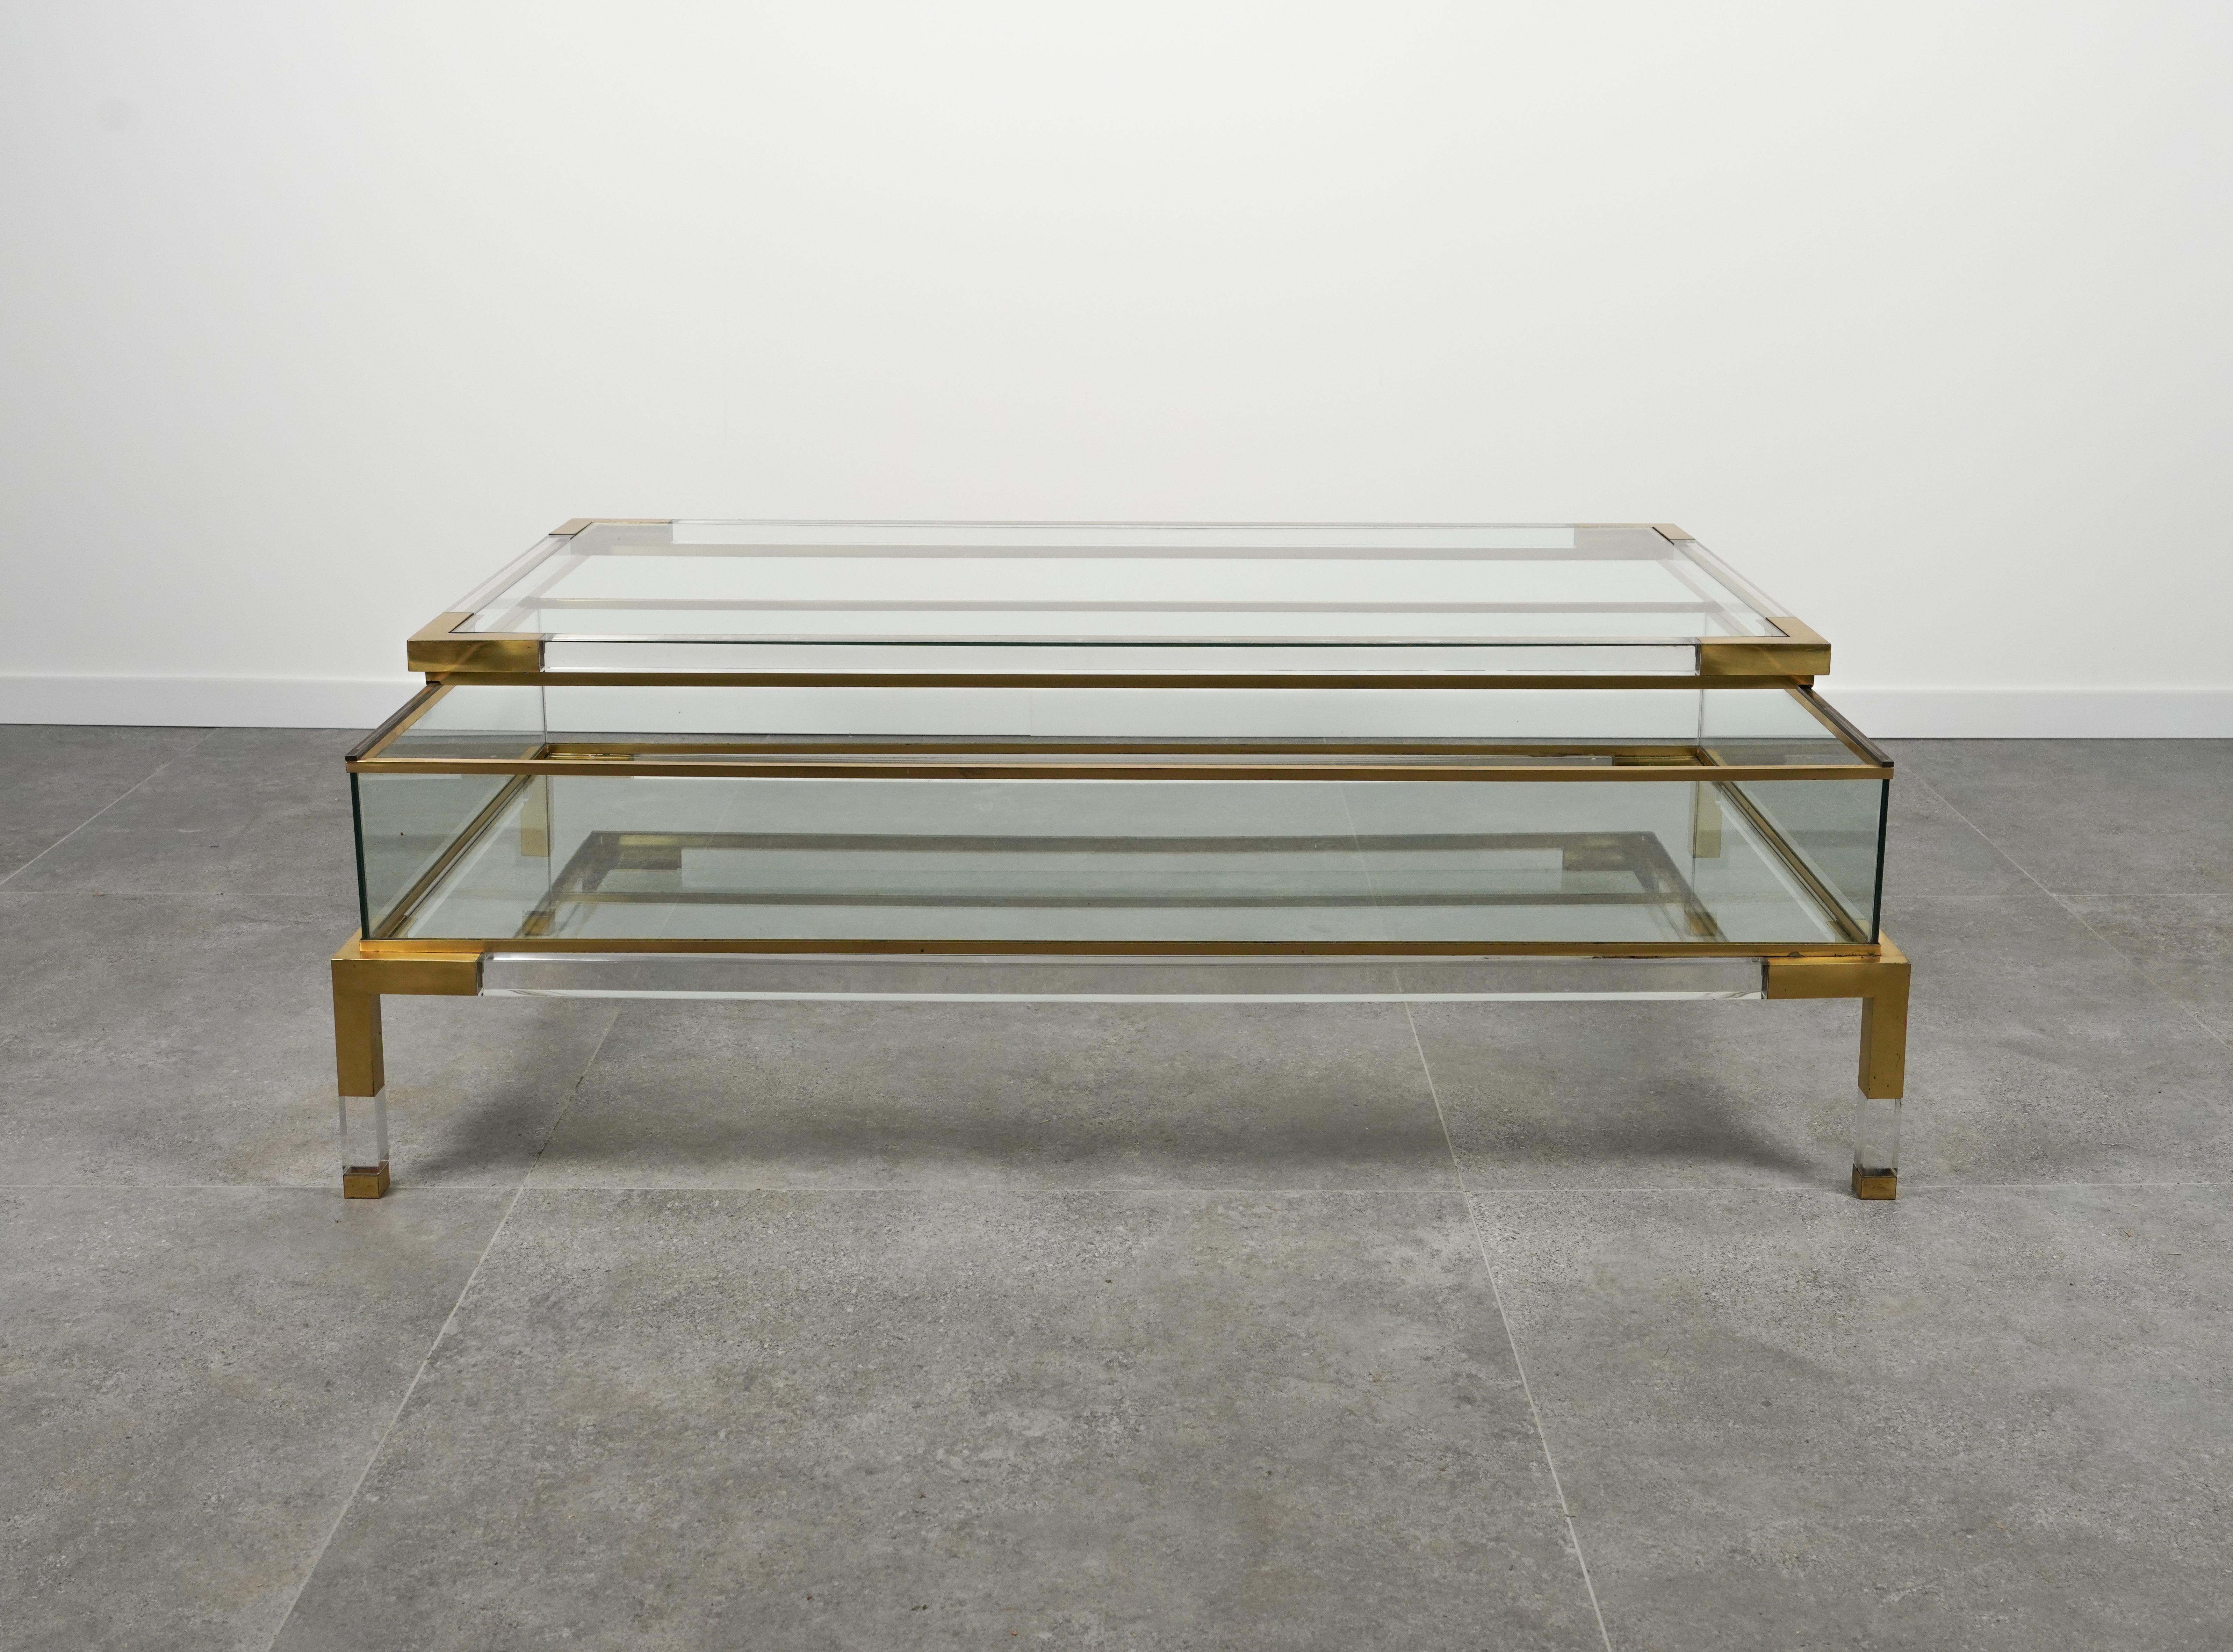 Midcentury Coffee Table in Lucite, Brass & Glass by Maison Jansen, France 1970s For Sale 2